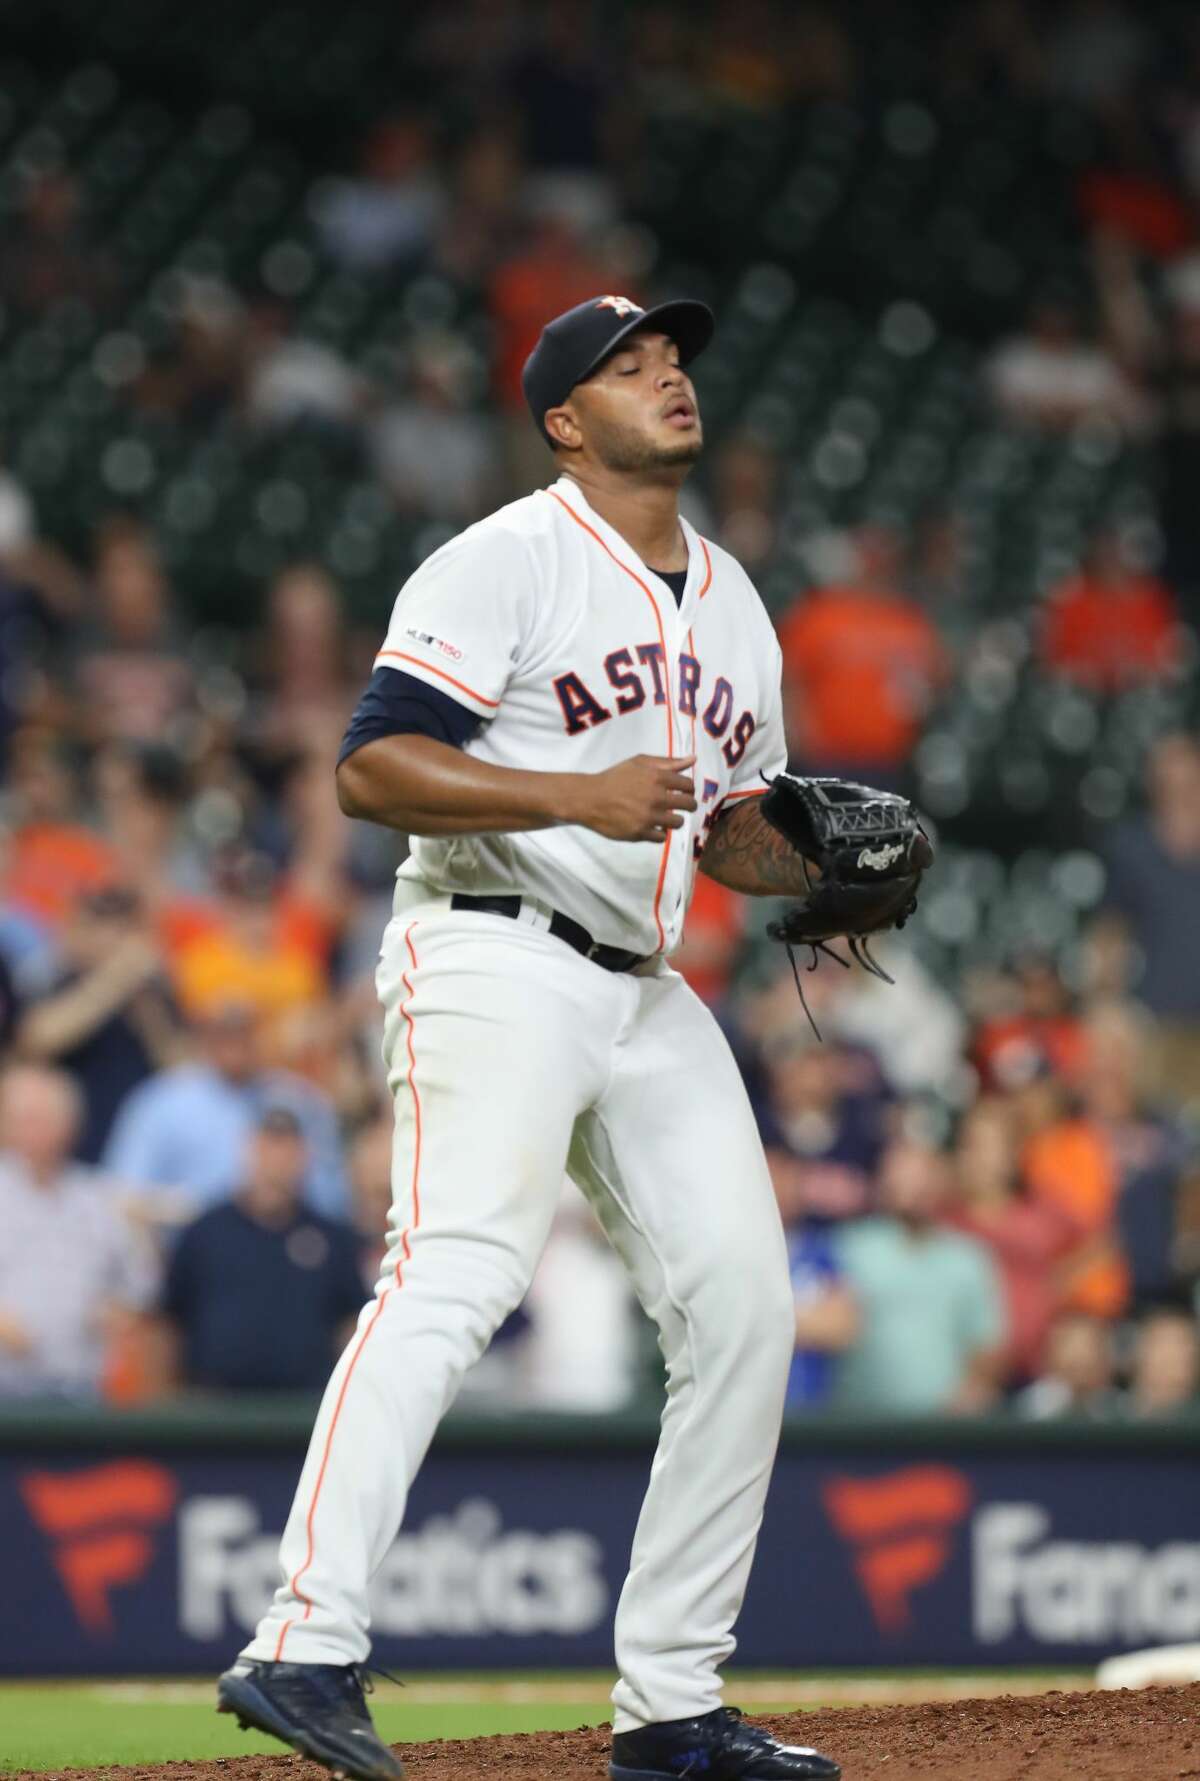 Houston Astros relief pitcher Josh James (39) reacts to making the final out during the an MLB baseball game at Minute Maid Park Wednesday, May 8, 2019, in Houston.